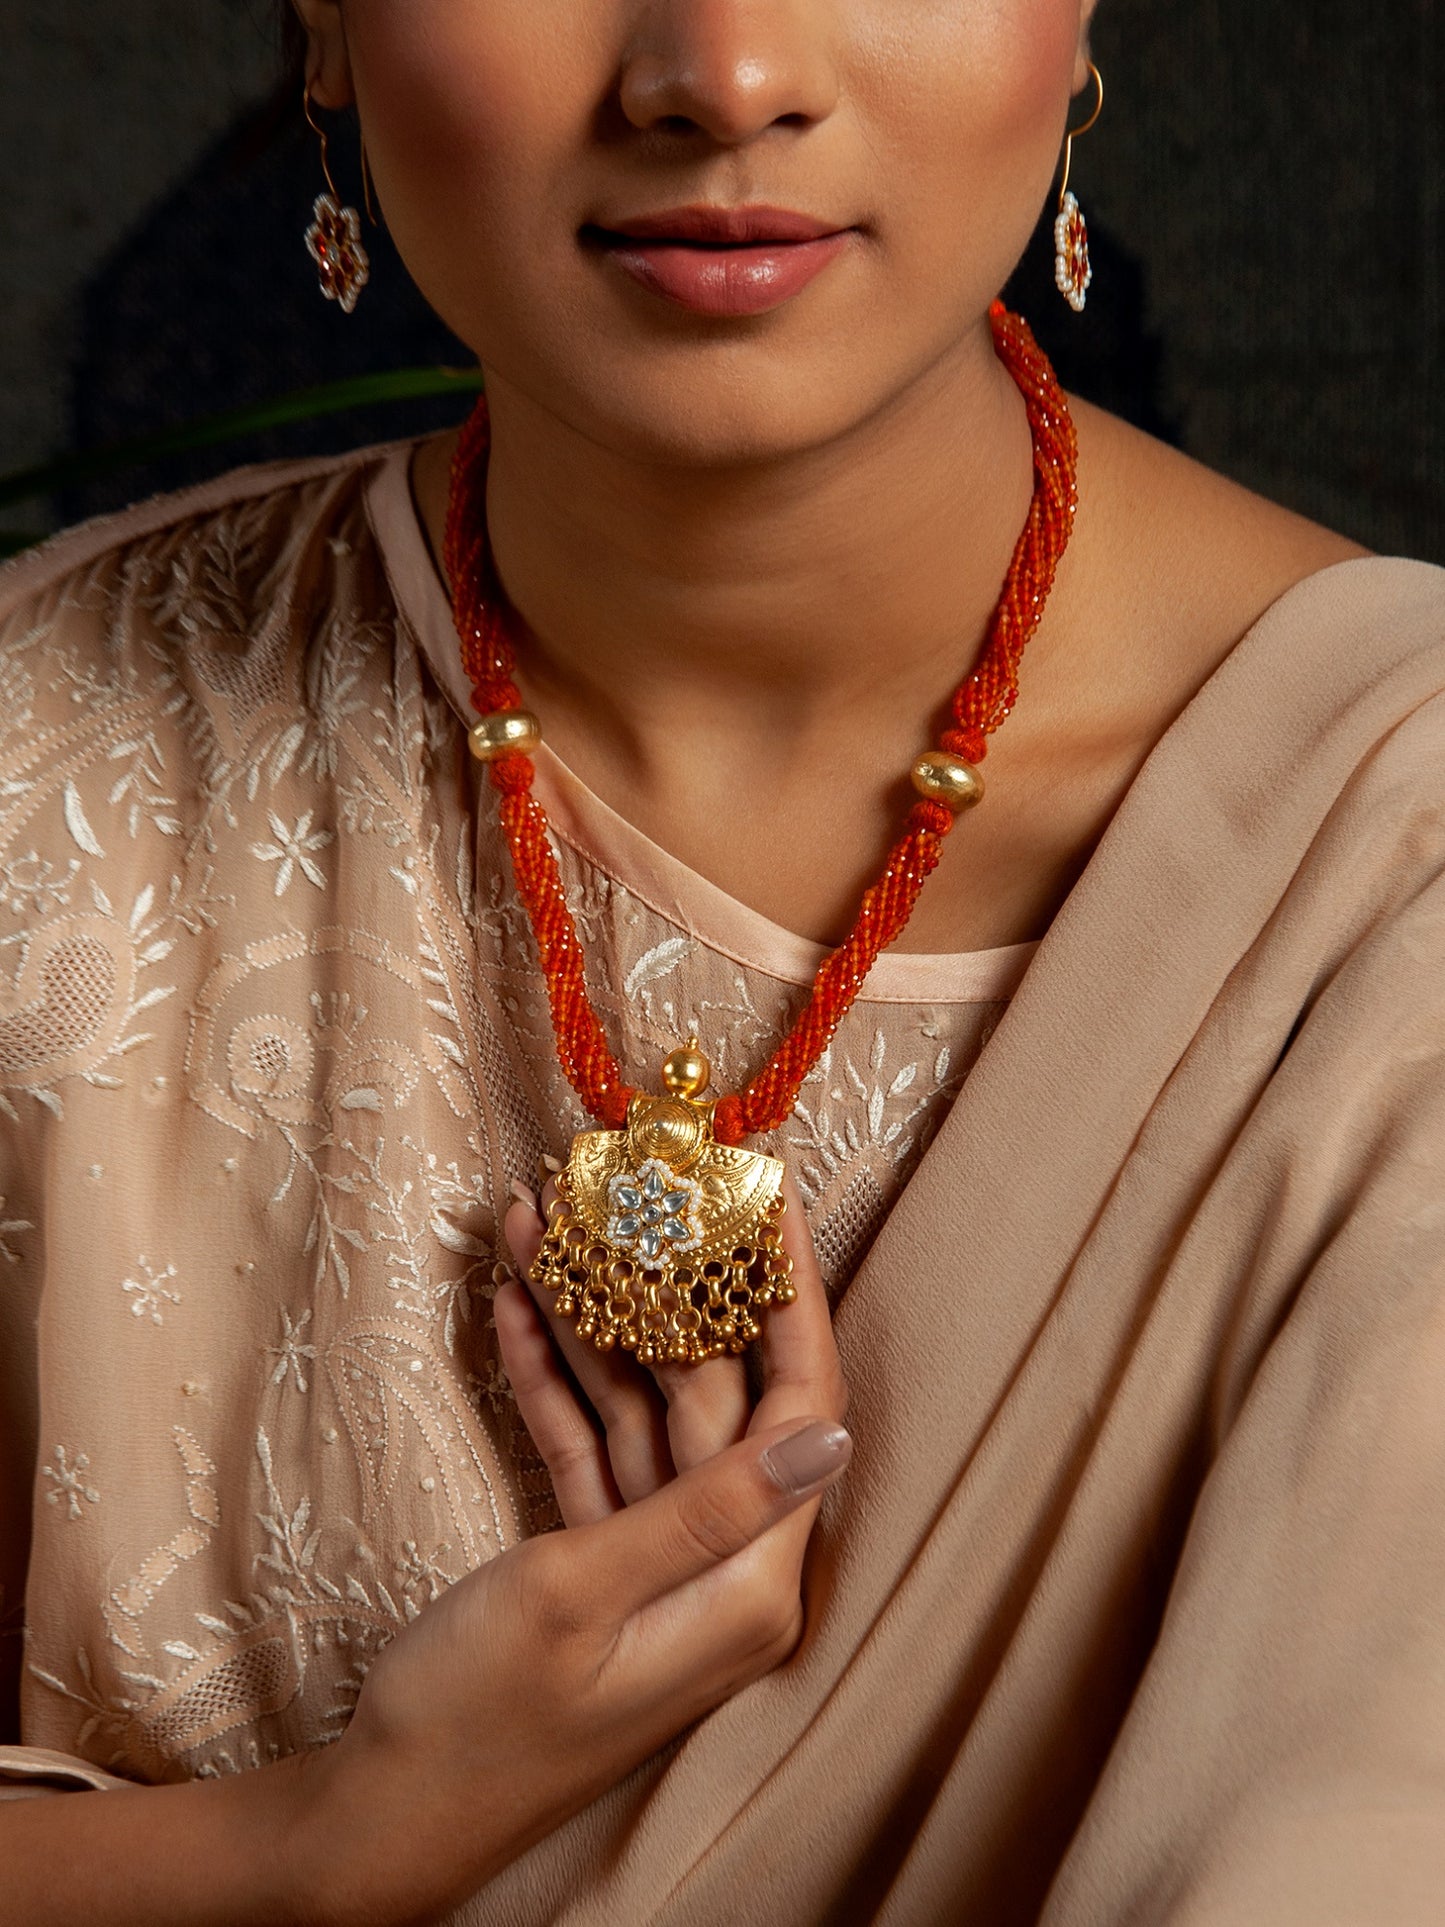 Golden Ghungroo Fusion: 925 Silver Gold Plated Pendant with Tribal Ghungroo, Floral Kundan Motif, and Orange Carnelian Gemstone Beads